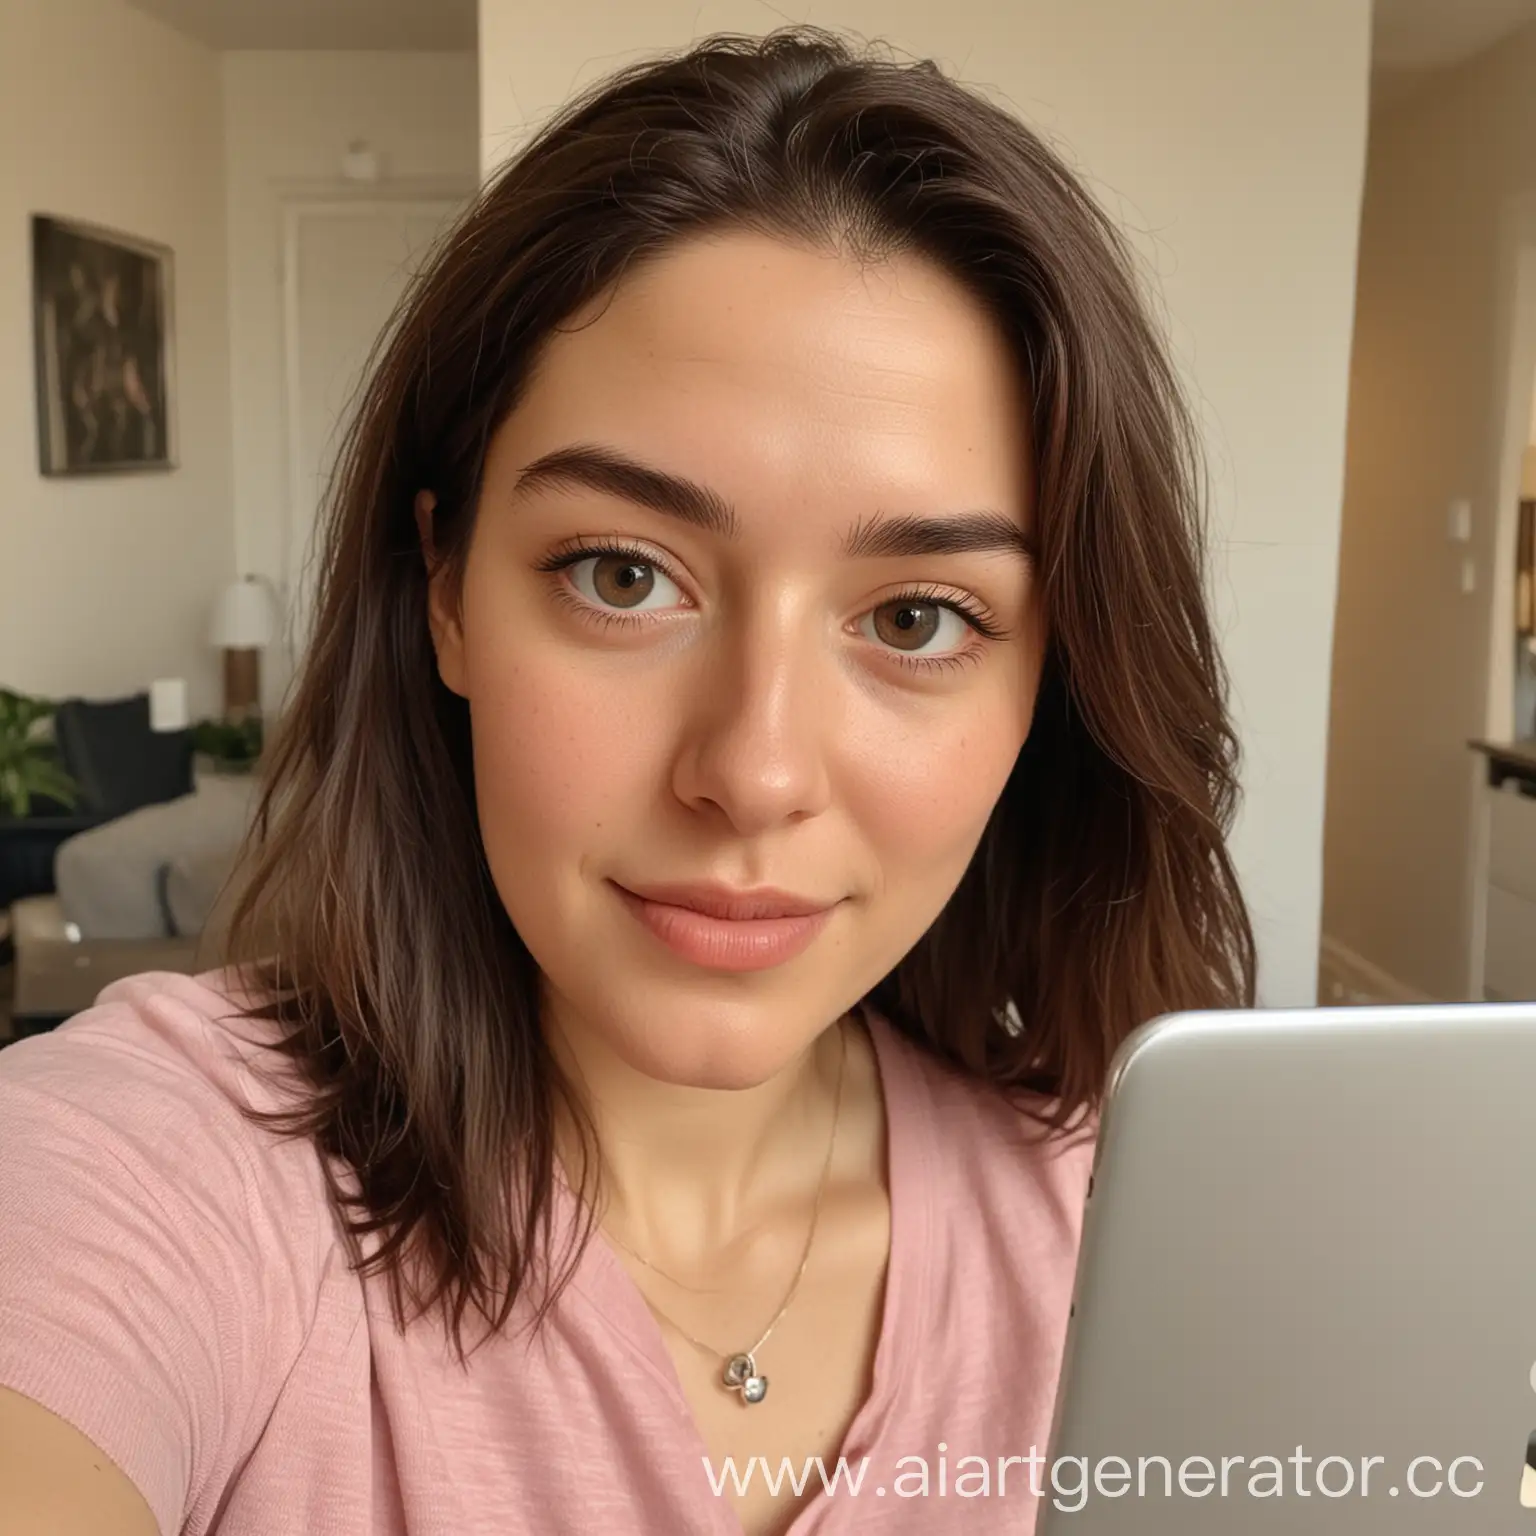 Woman-Taking-Selfie-with-iPhone-11-in-Home-Office-Setting